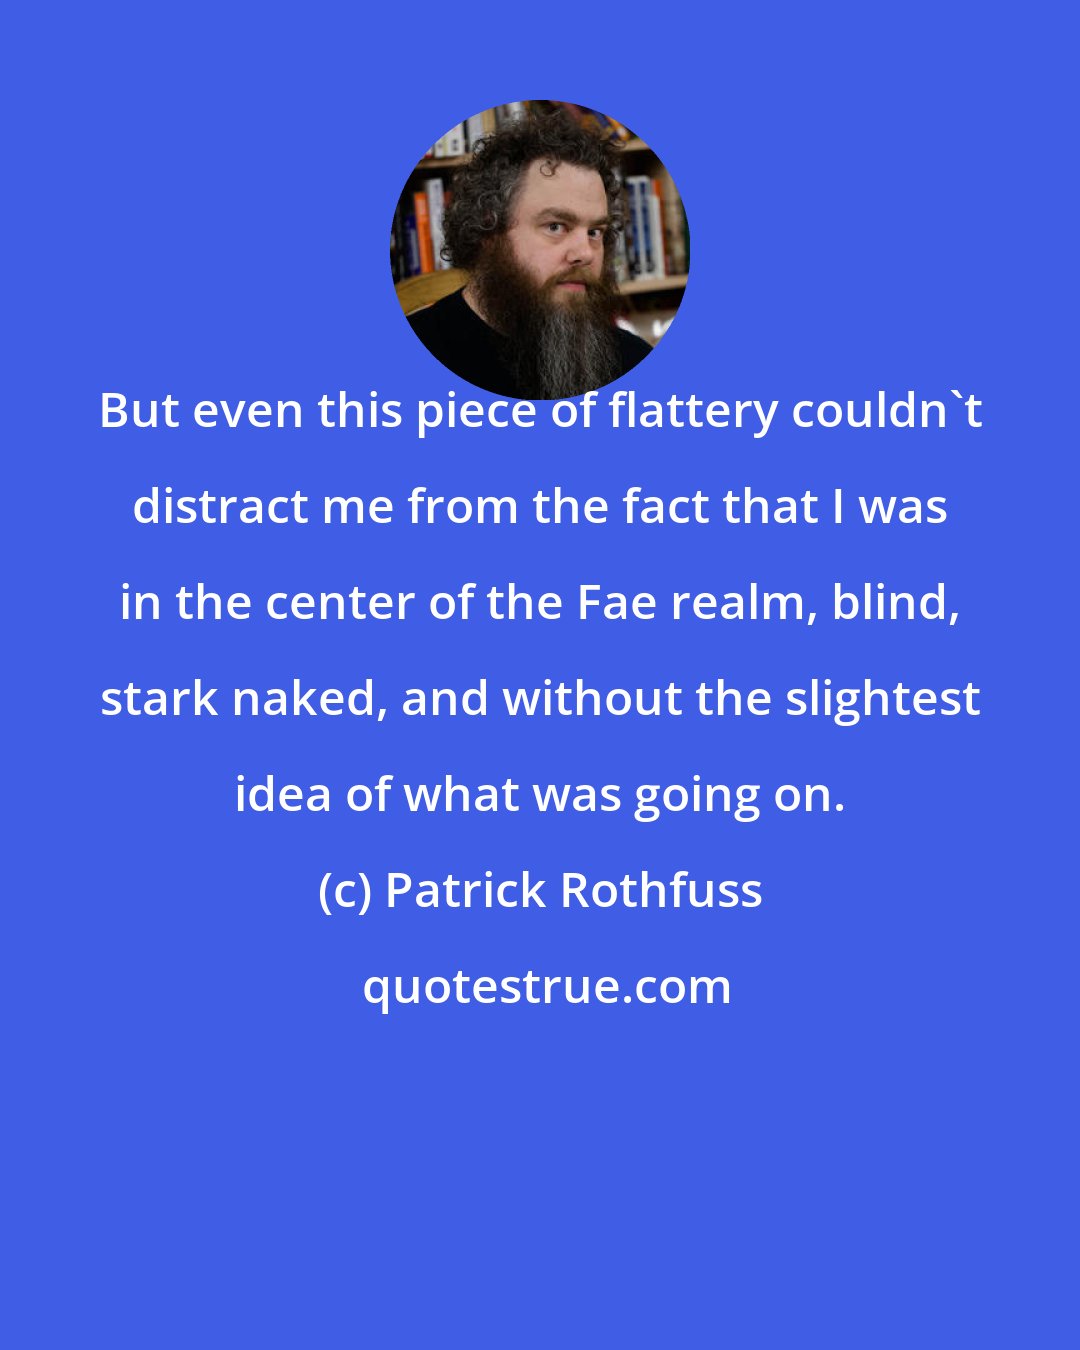 Patrick Rothfuss: But even this piece of flattery couldn't distract me from the fact that I was in the center of the Fae realm, blind, stark naked, and without the slightest idea of what was going on.